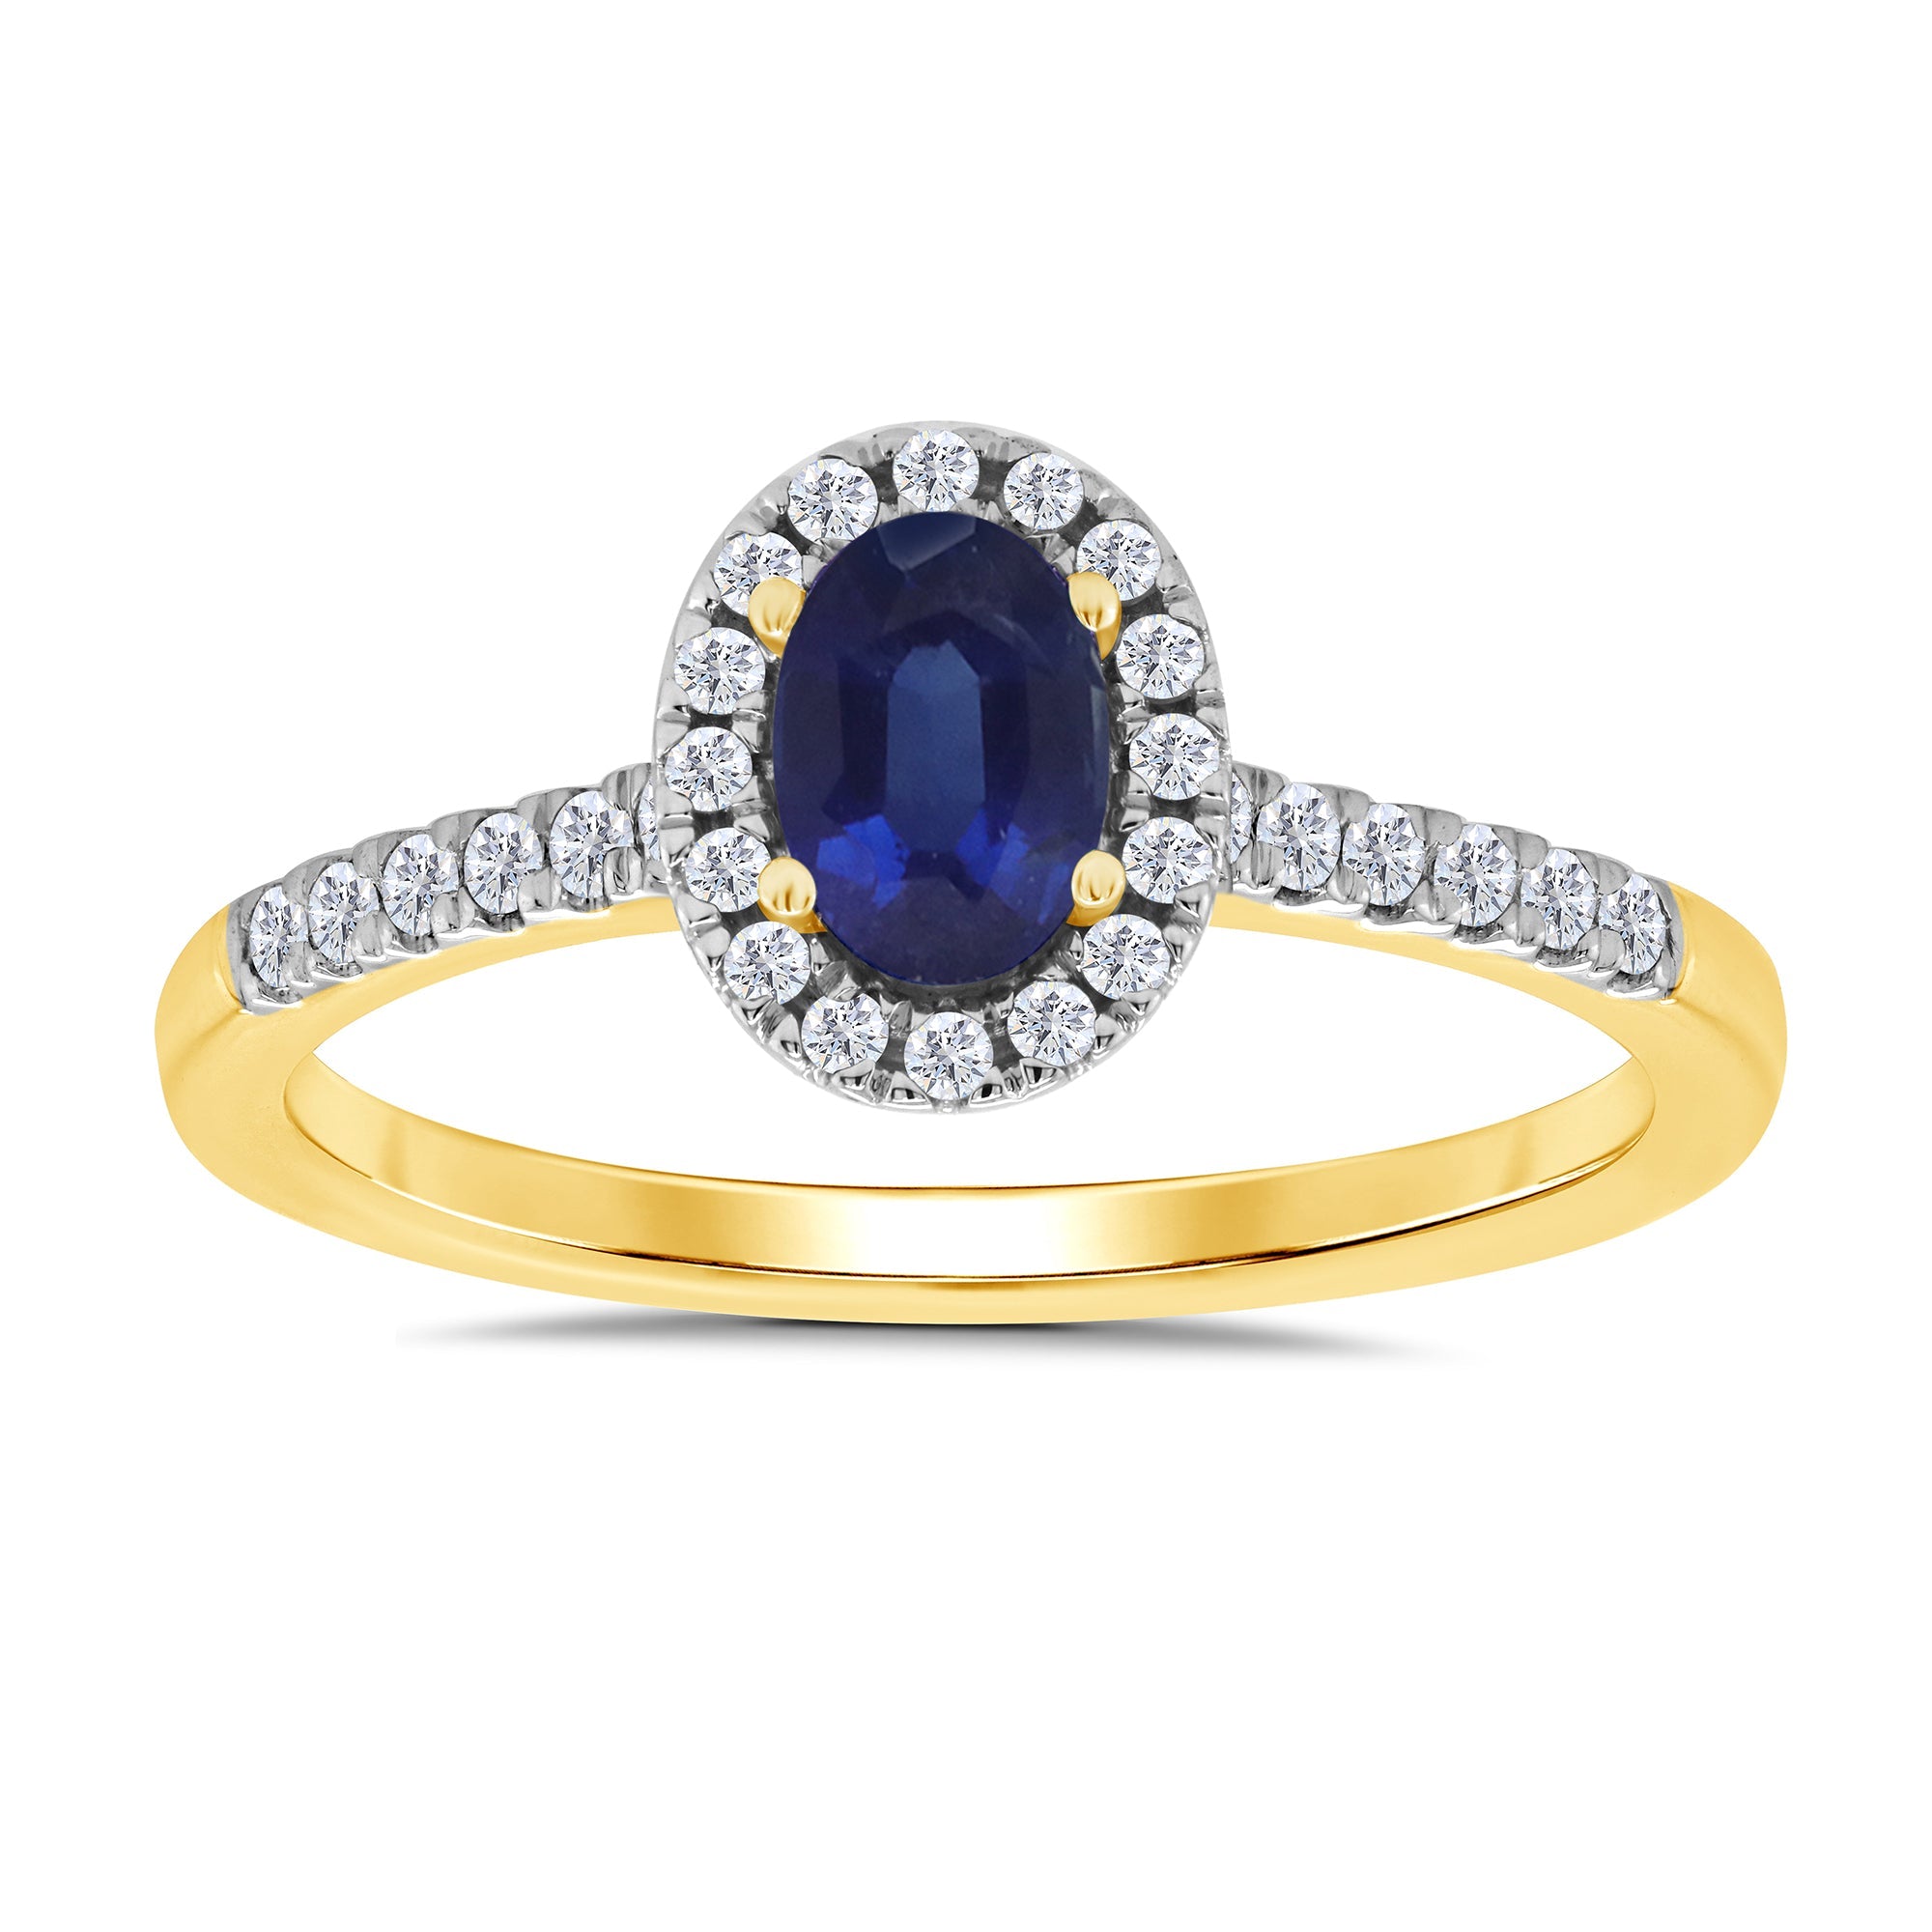 9ct gold 6x4mm oval sapphire & diamond cluster ring with diamond set shoulders 0.20ct